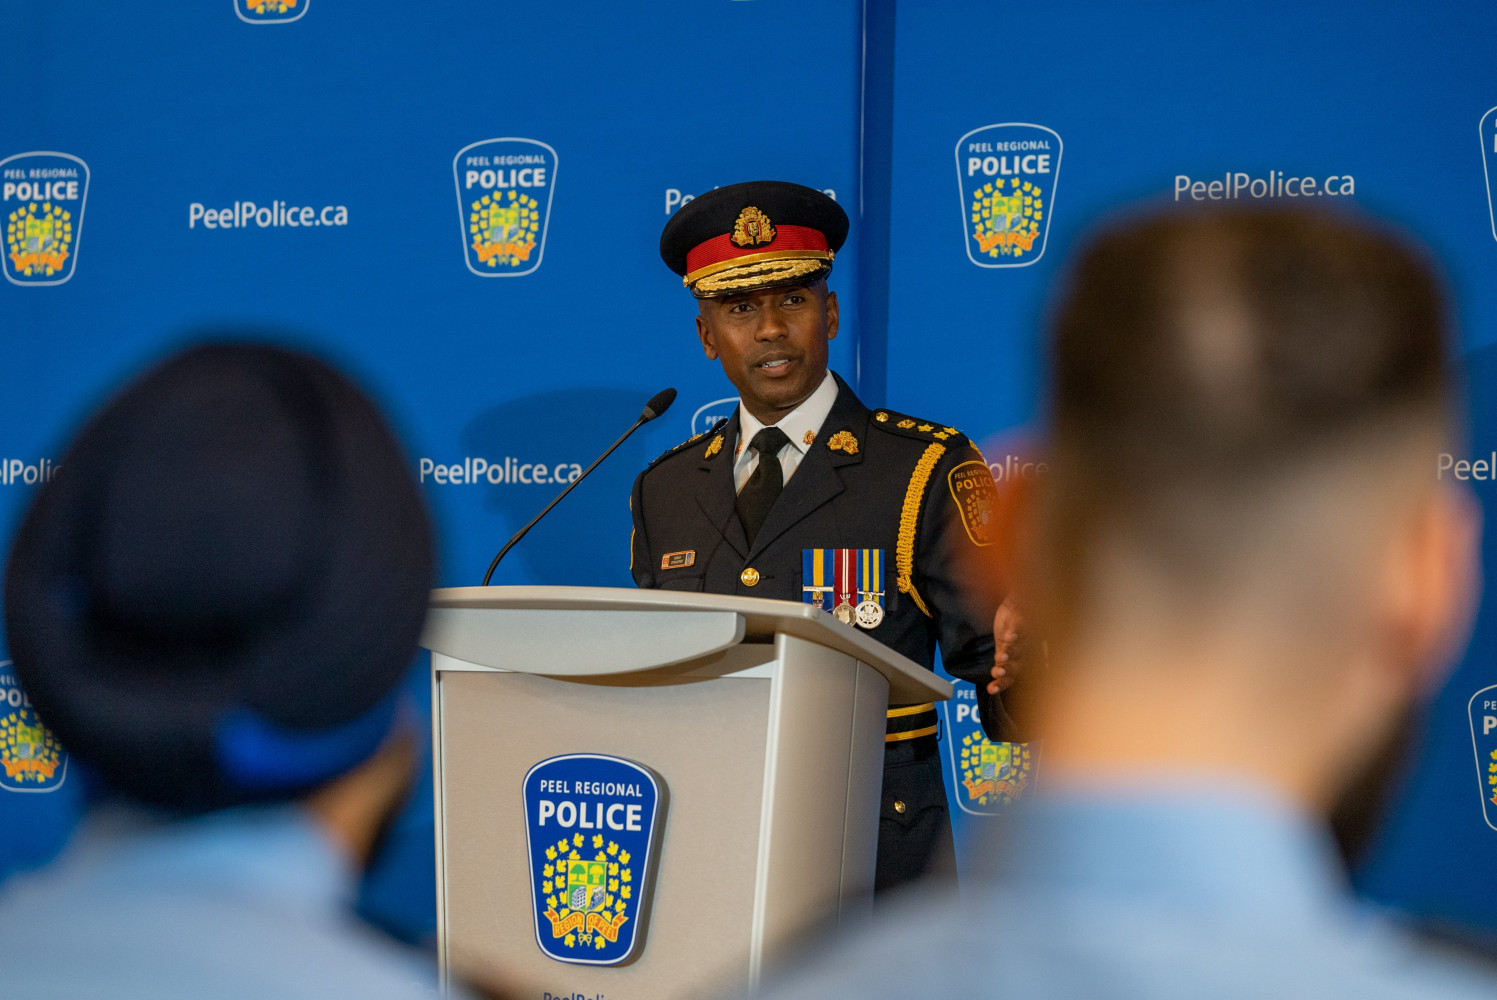 ‘This need is immediate’: Significant budget boost necessary to meet demands of growing region, police chief says 